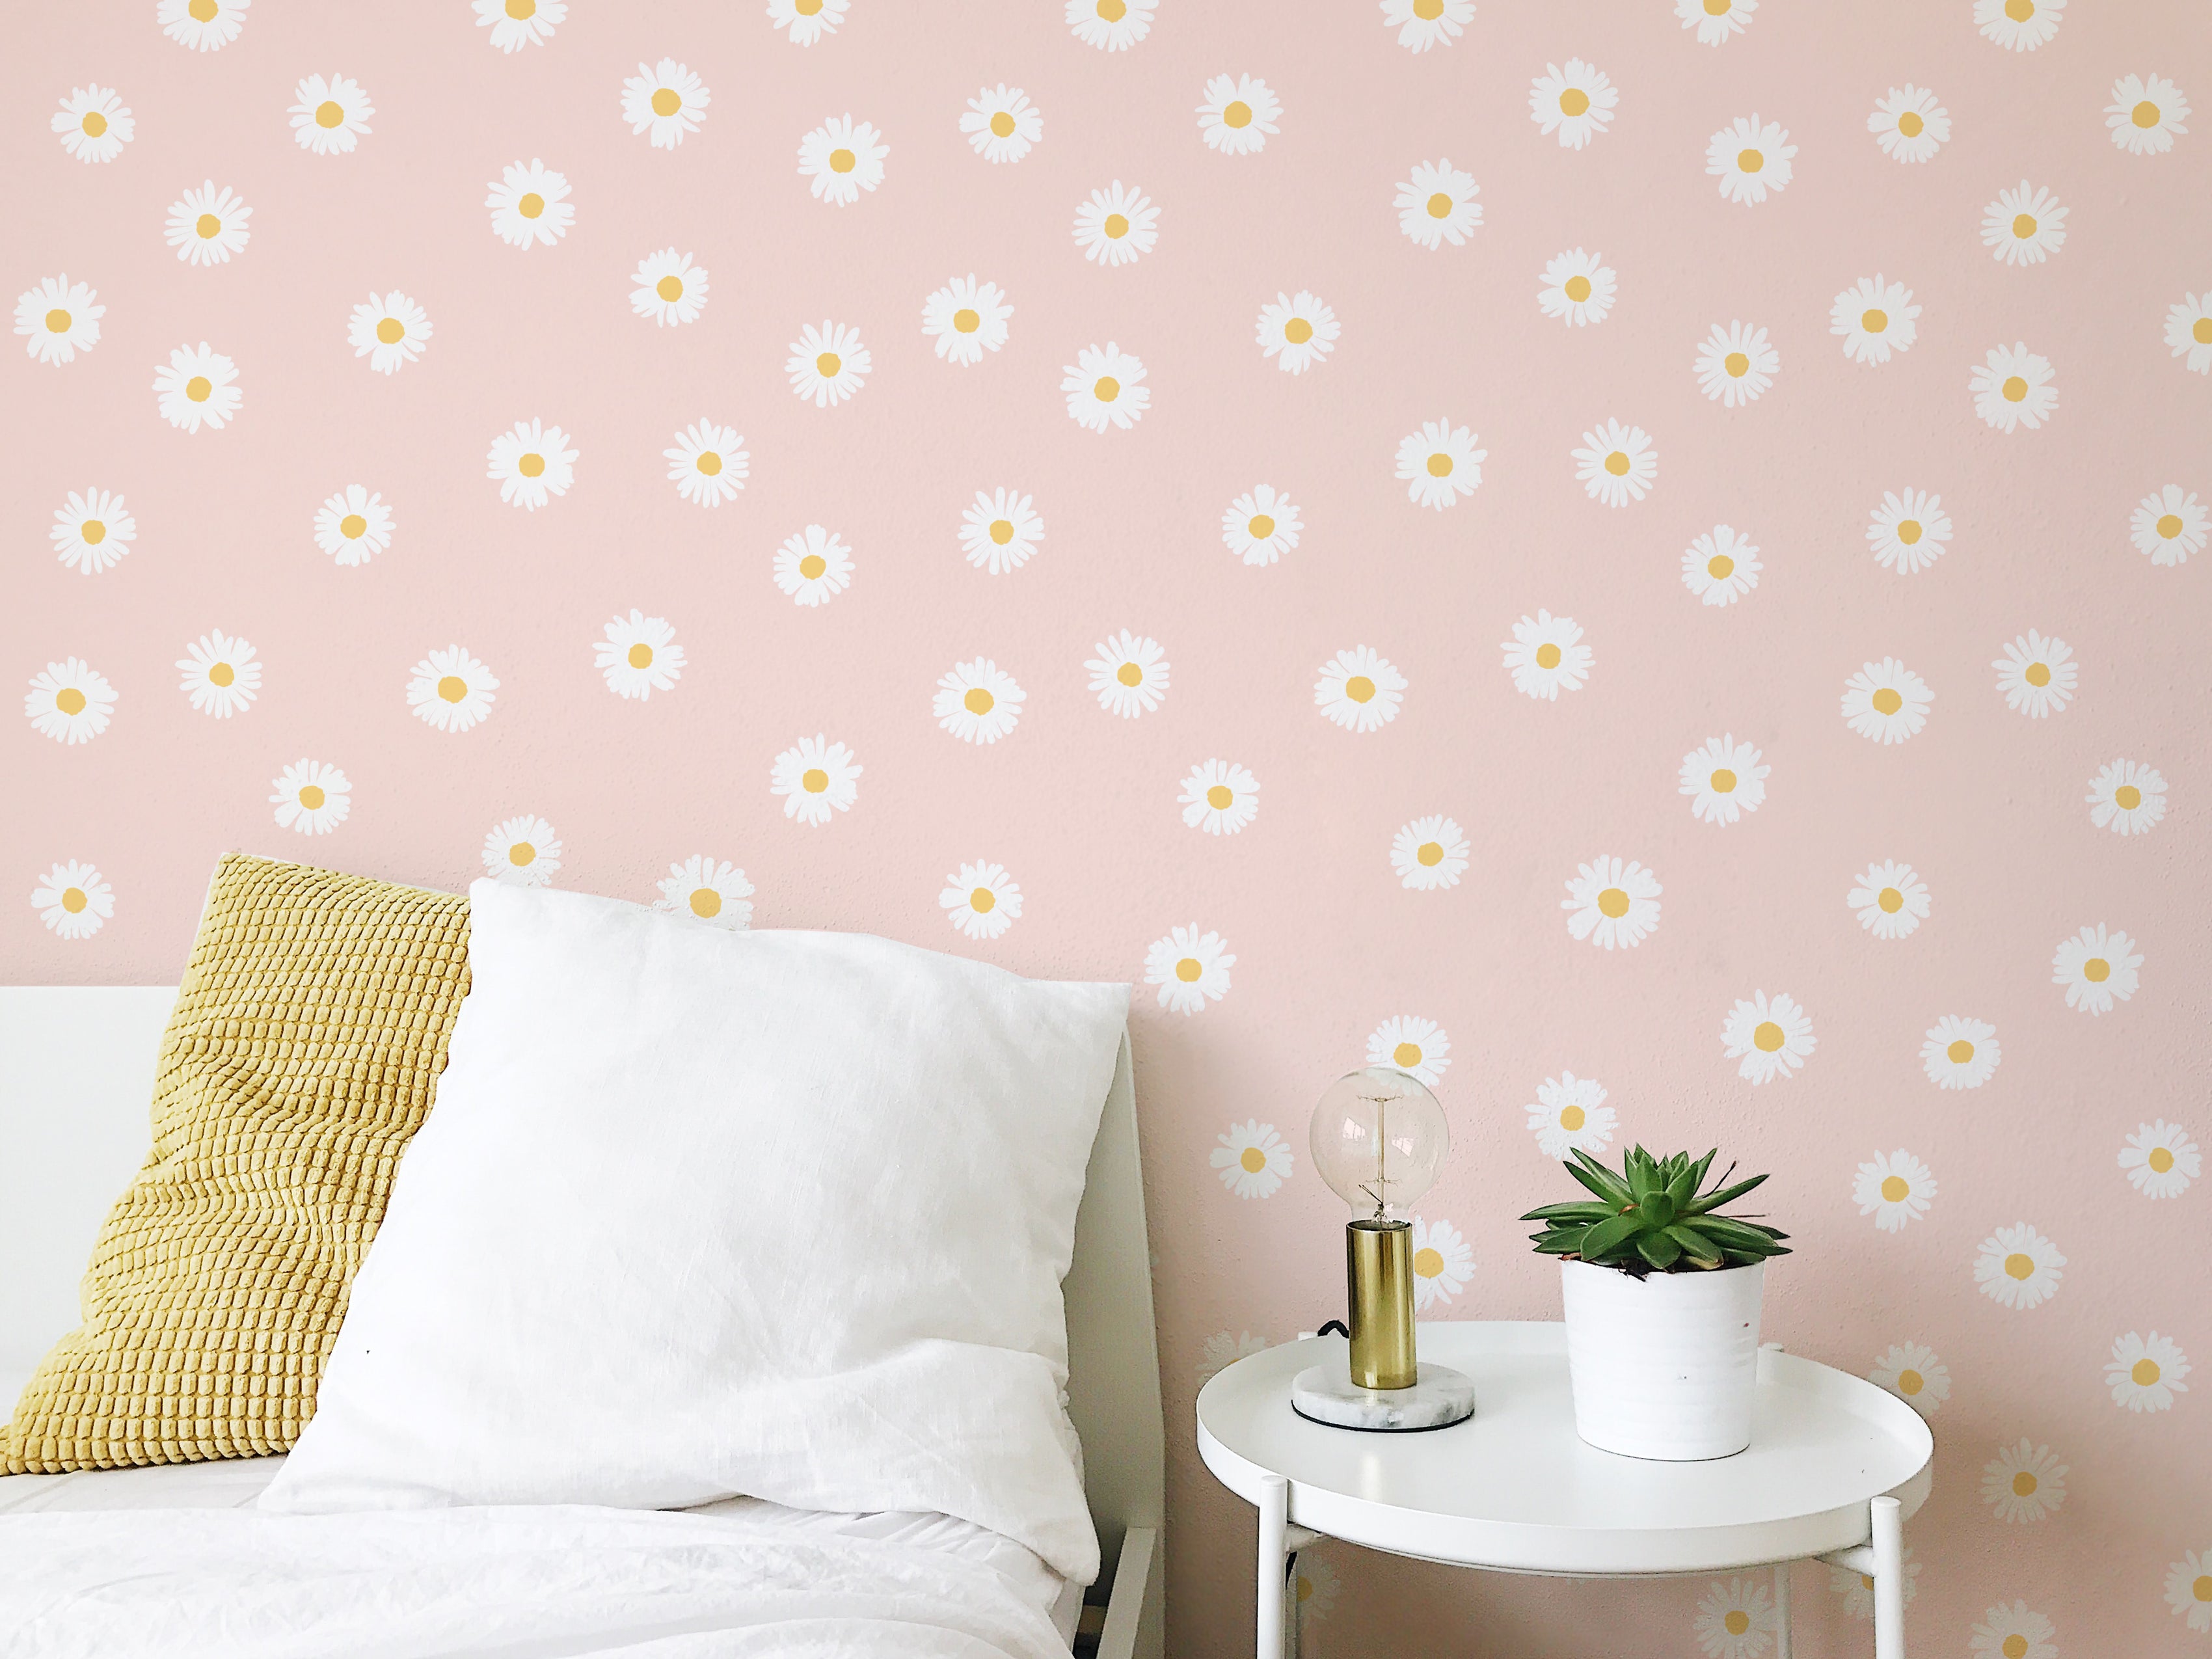 A cozy bedroom corner featuring a pastel pink wall adorned with Daisy Daze Wallpaper. The wallpaper has a light peach background with a pattern of white daisies with yellow centers. Next to the bed, covered with white linens, sits a small round table with a lamp and a potted plant, enhancing the room's cheerful and airy feel.